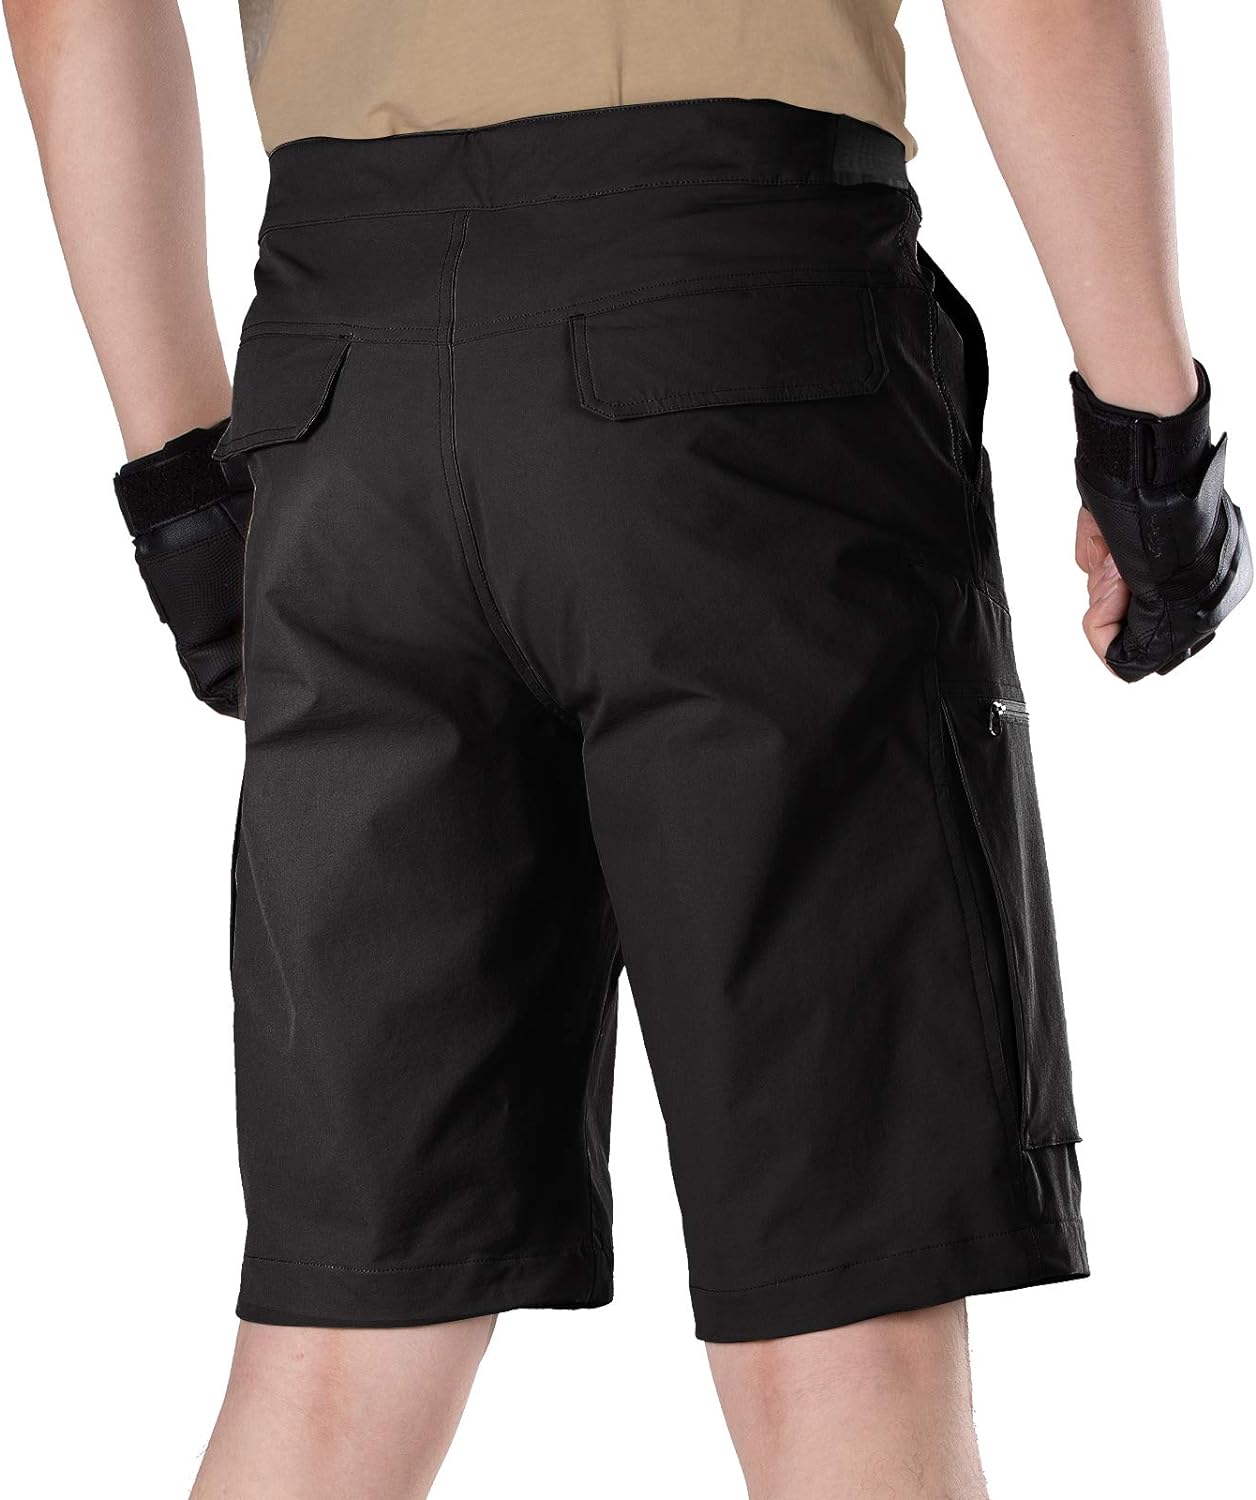 FREE SOLDIER Mens Cargo Shorts Breathable Lightweight Quick Dry Hiking Tactical Shorts Nylon Spandex